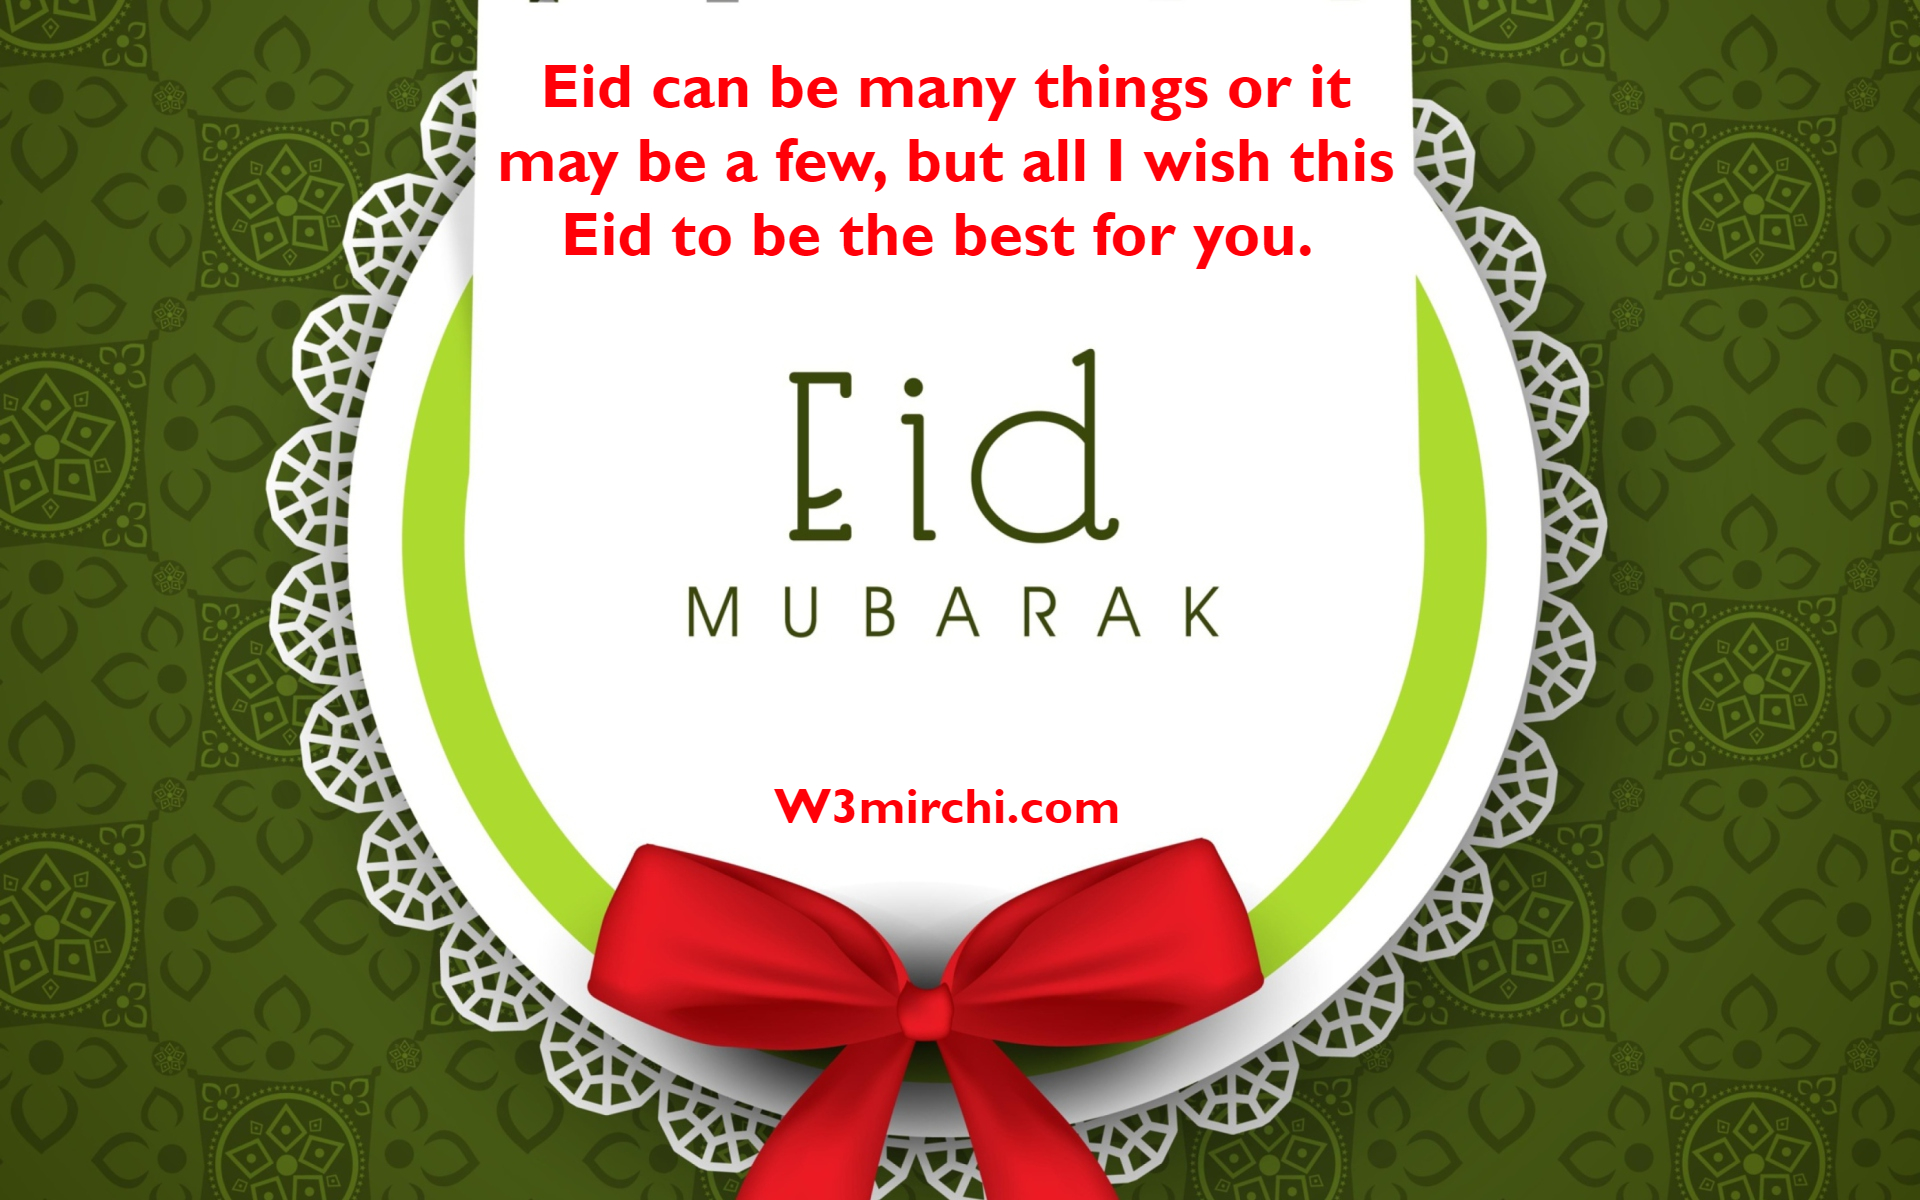 Eid can be many things or it may be a few,